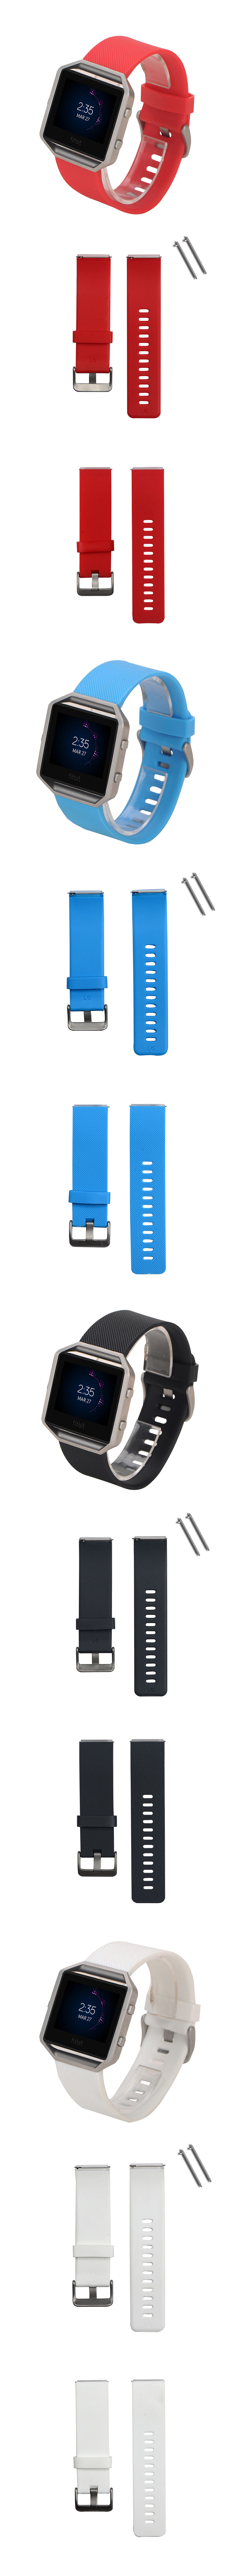 23mm-Fashion-Colorful-Silicone-Strap-Watch-Band-Replacement-for-Fitbit-Blaze-Smart-Watch-1315138